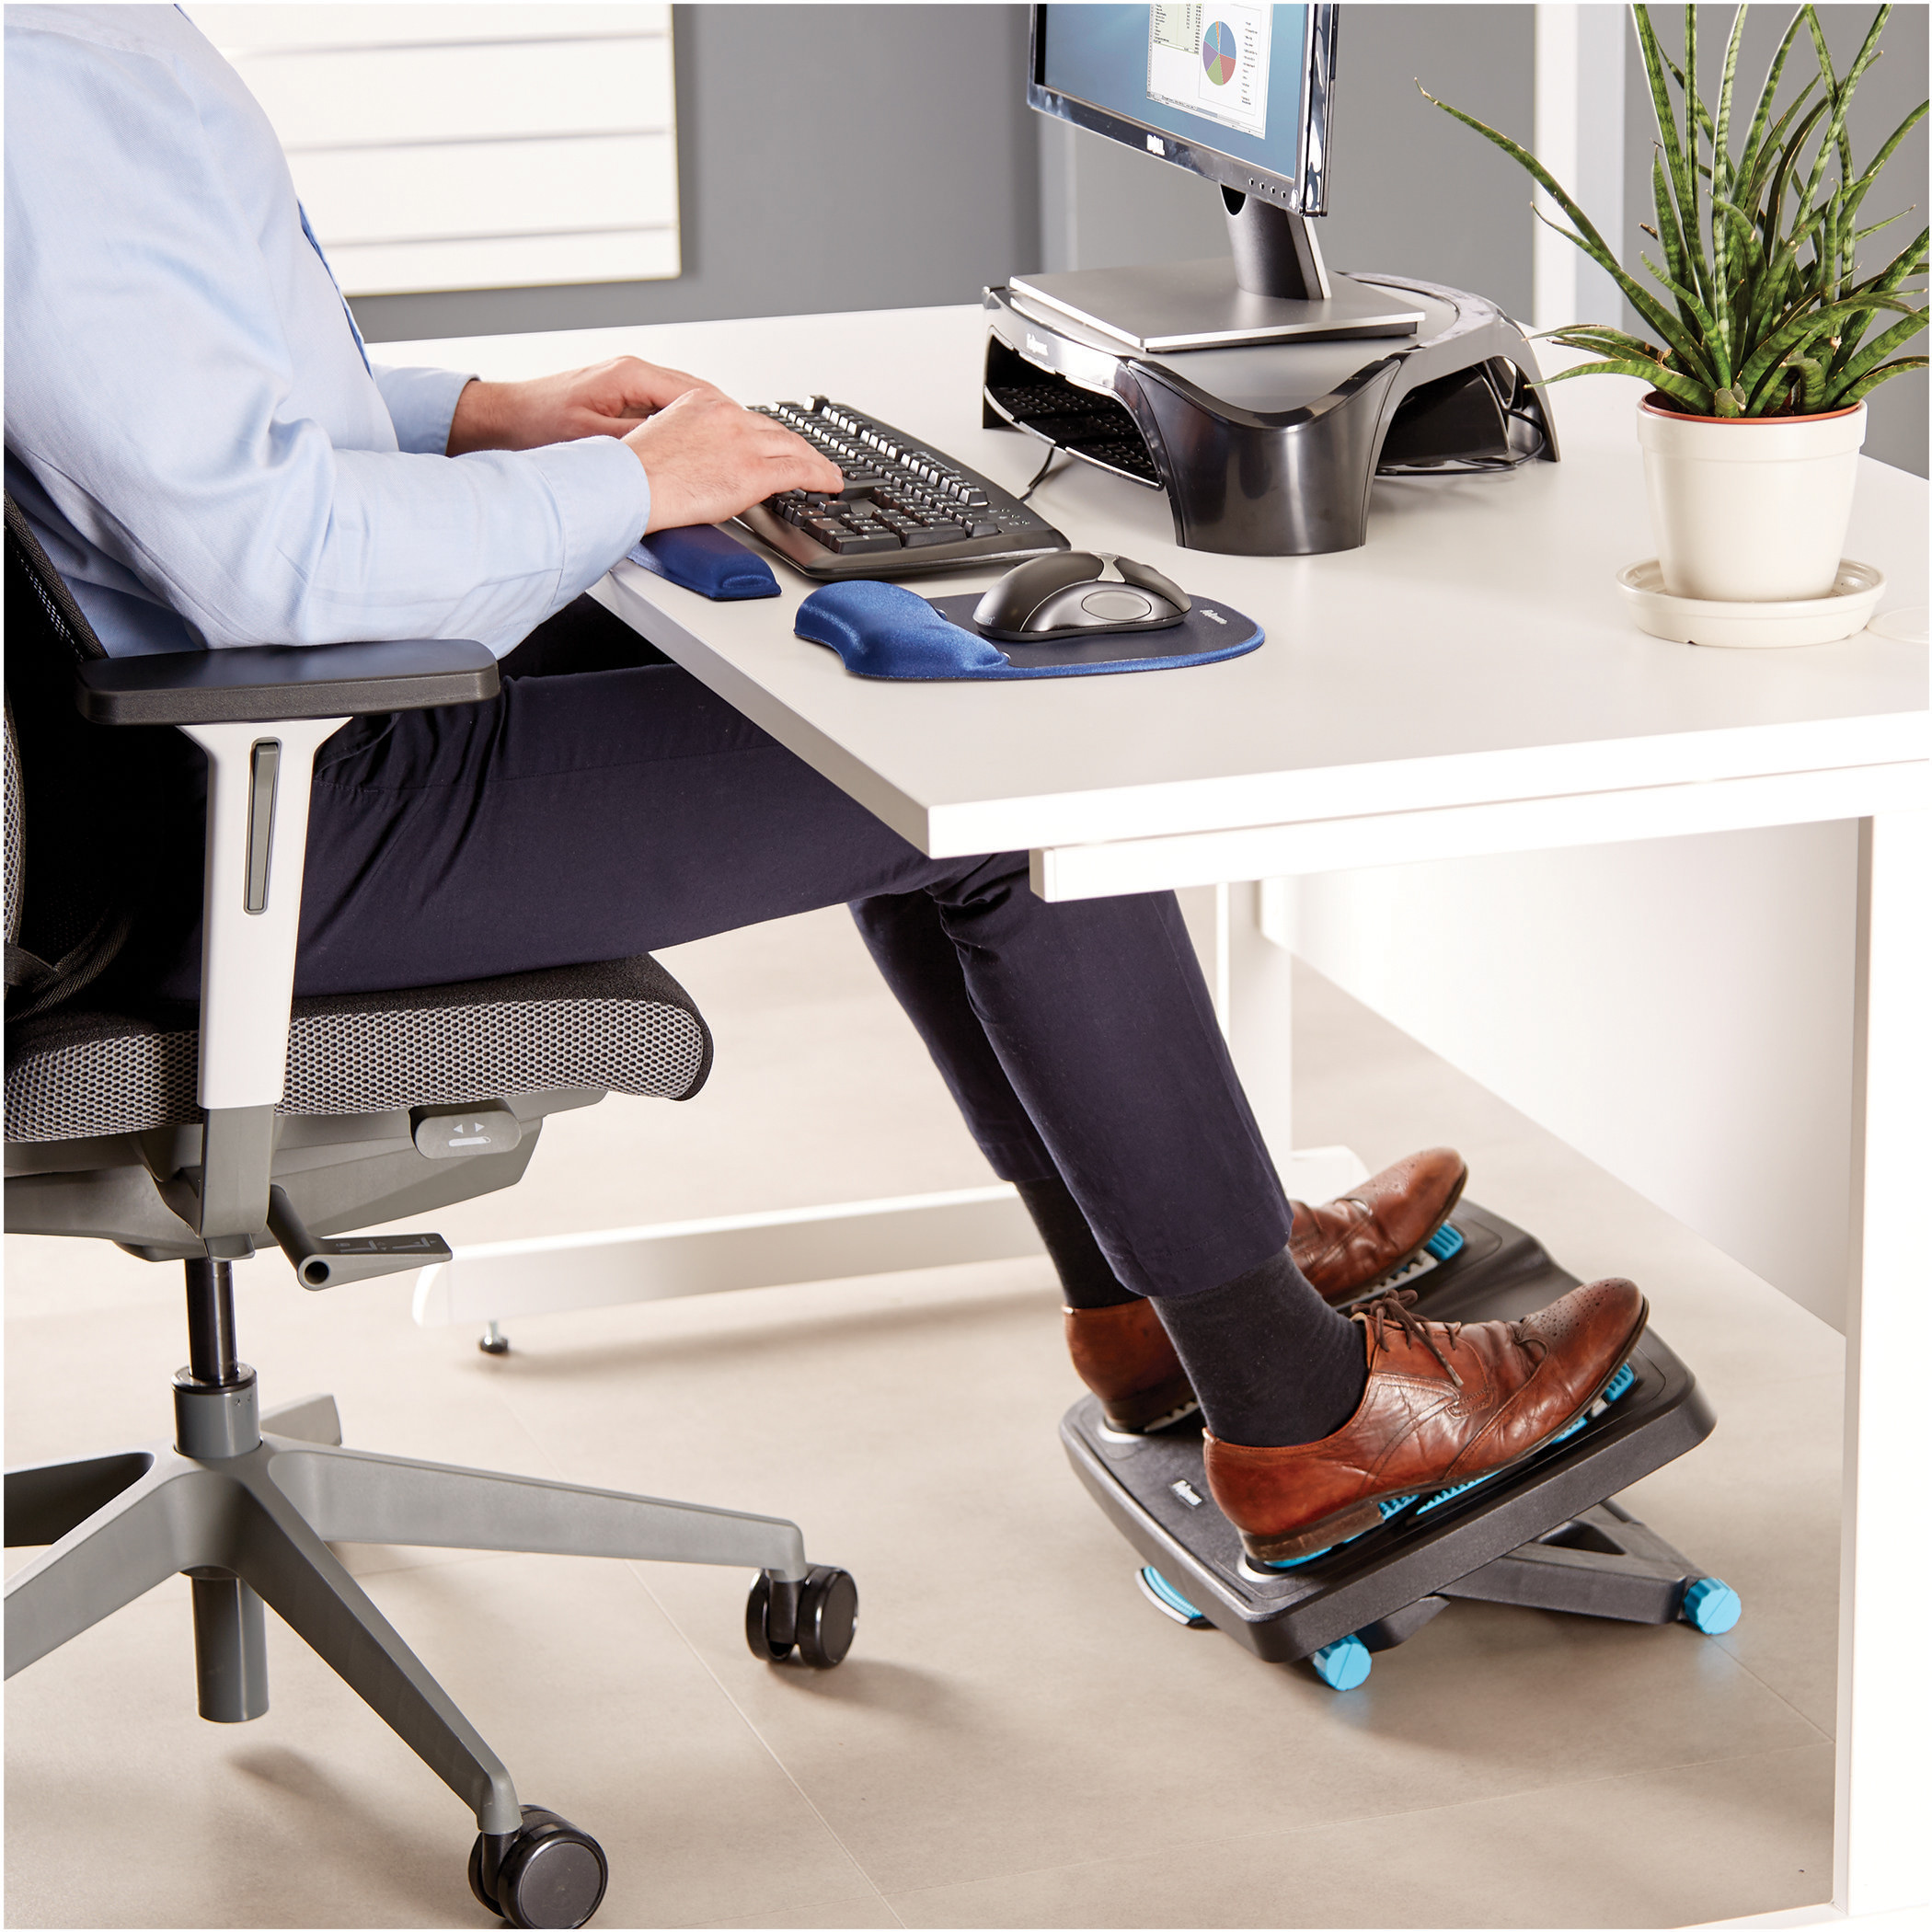 PROVANTAGE: Fellowes 8068001 Energizer Foot Support